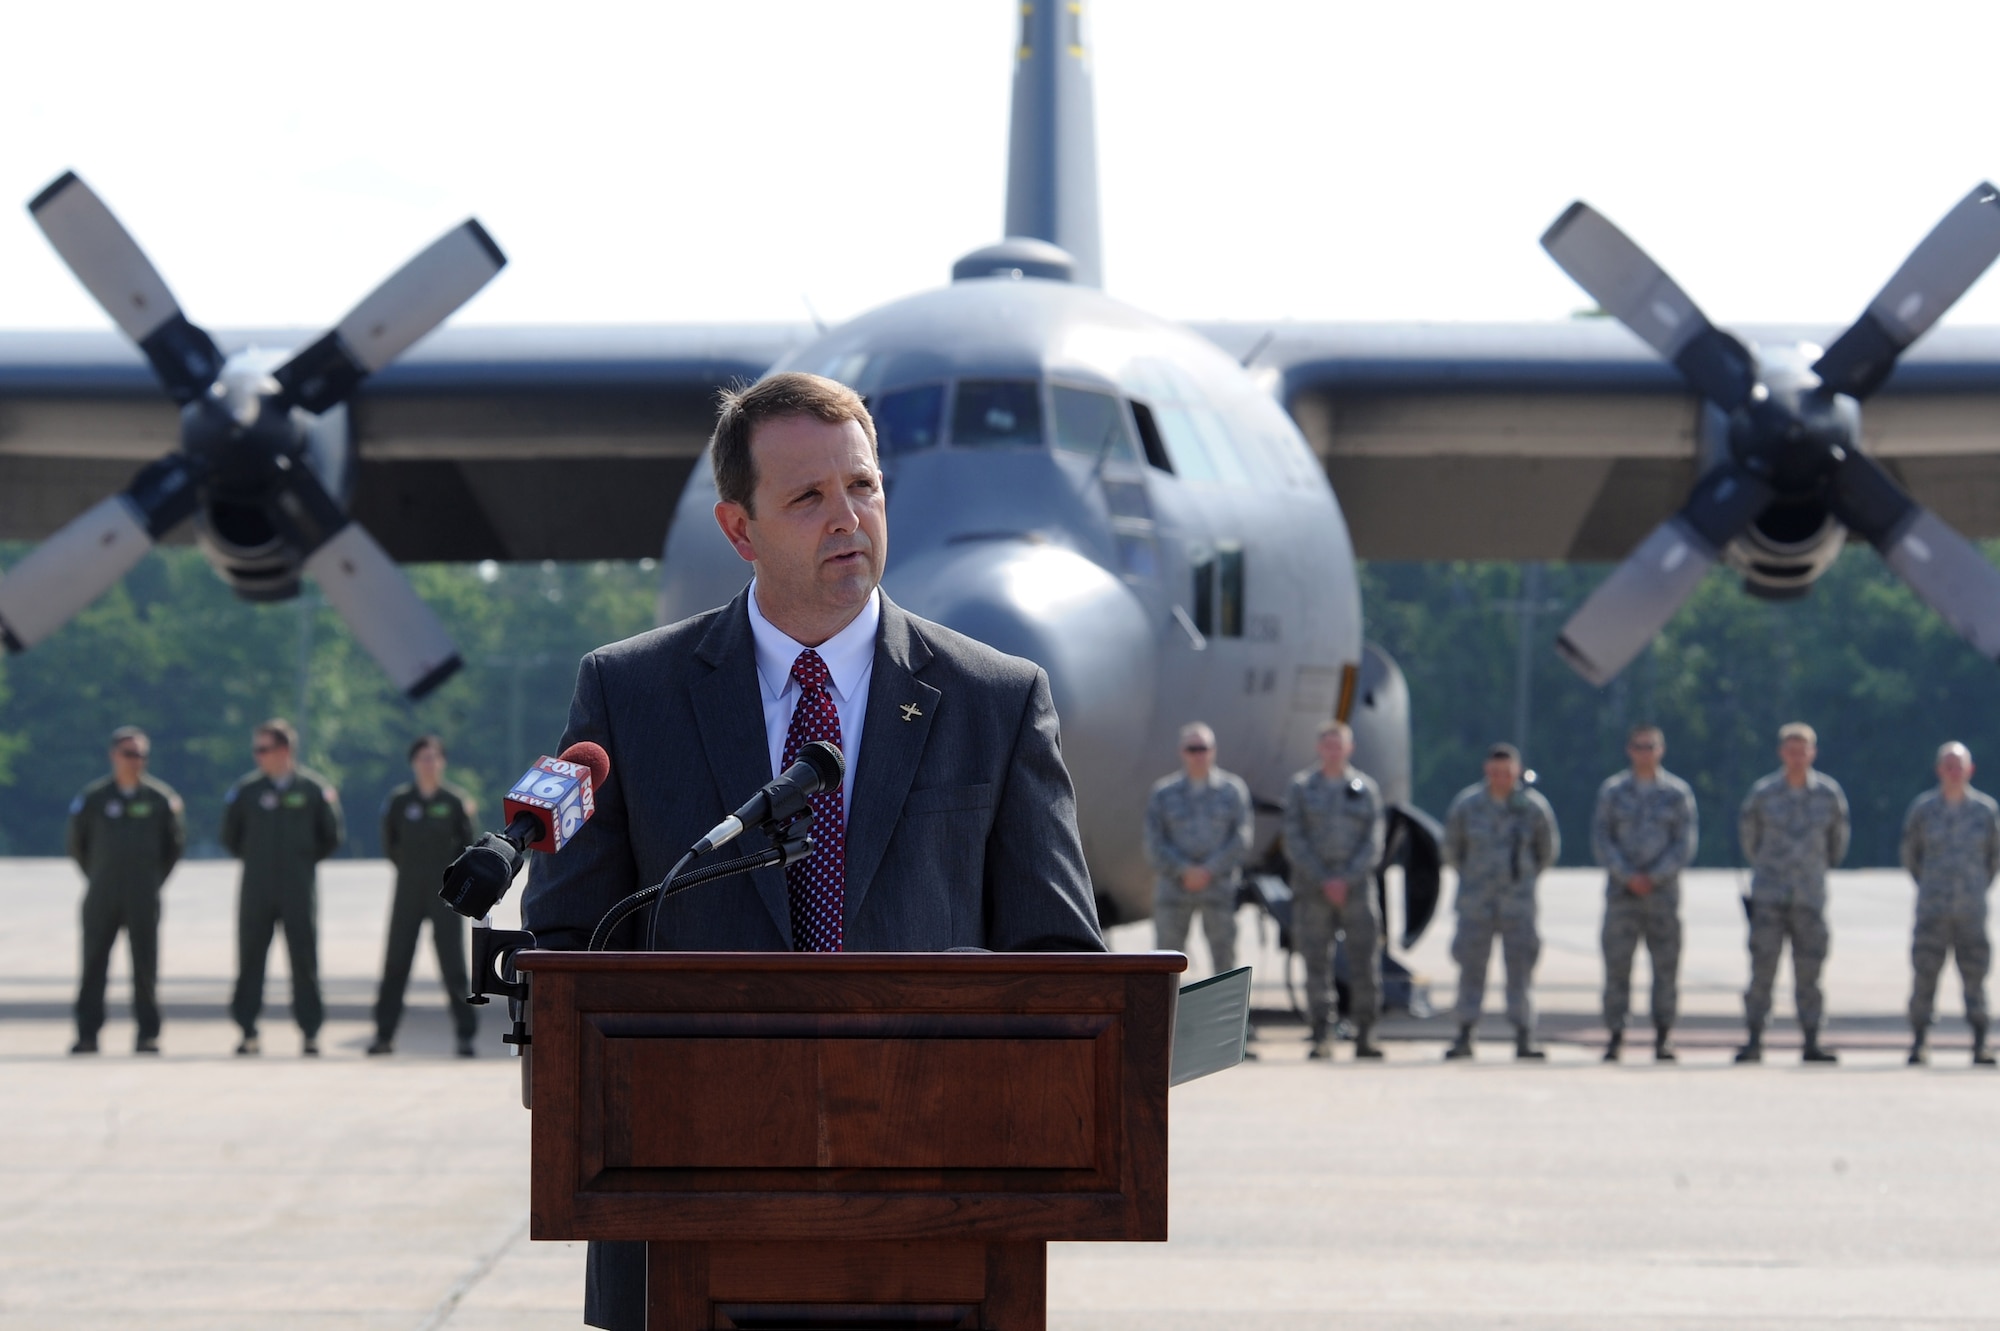 Fred Ross, Vice President of C-130 Programs for Lockheed Martin, speaks to an audience attending the retirement of C130E 61-2358, May 1, 2012, at Little Rock Air Force Base, Ark. (U.S. Air Force photo by Tech. Sgt. Chad Chisholm)